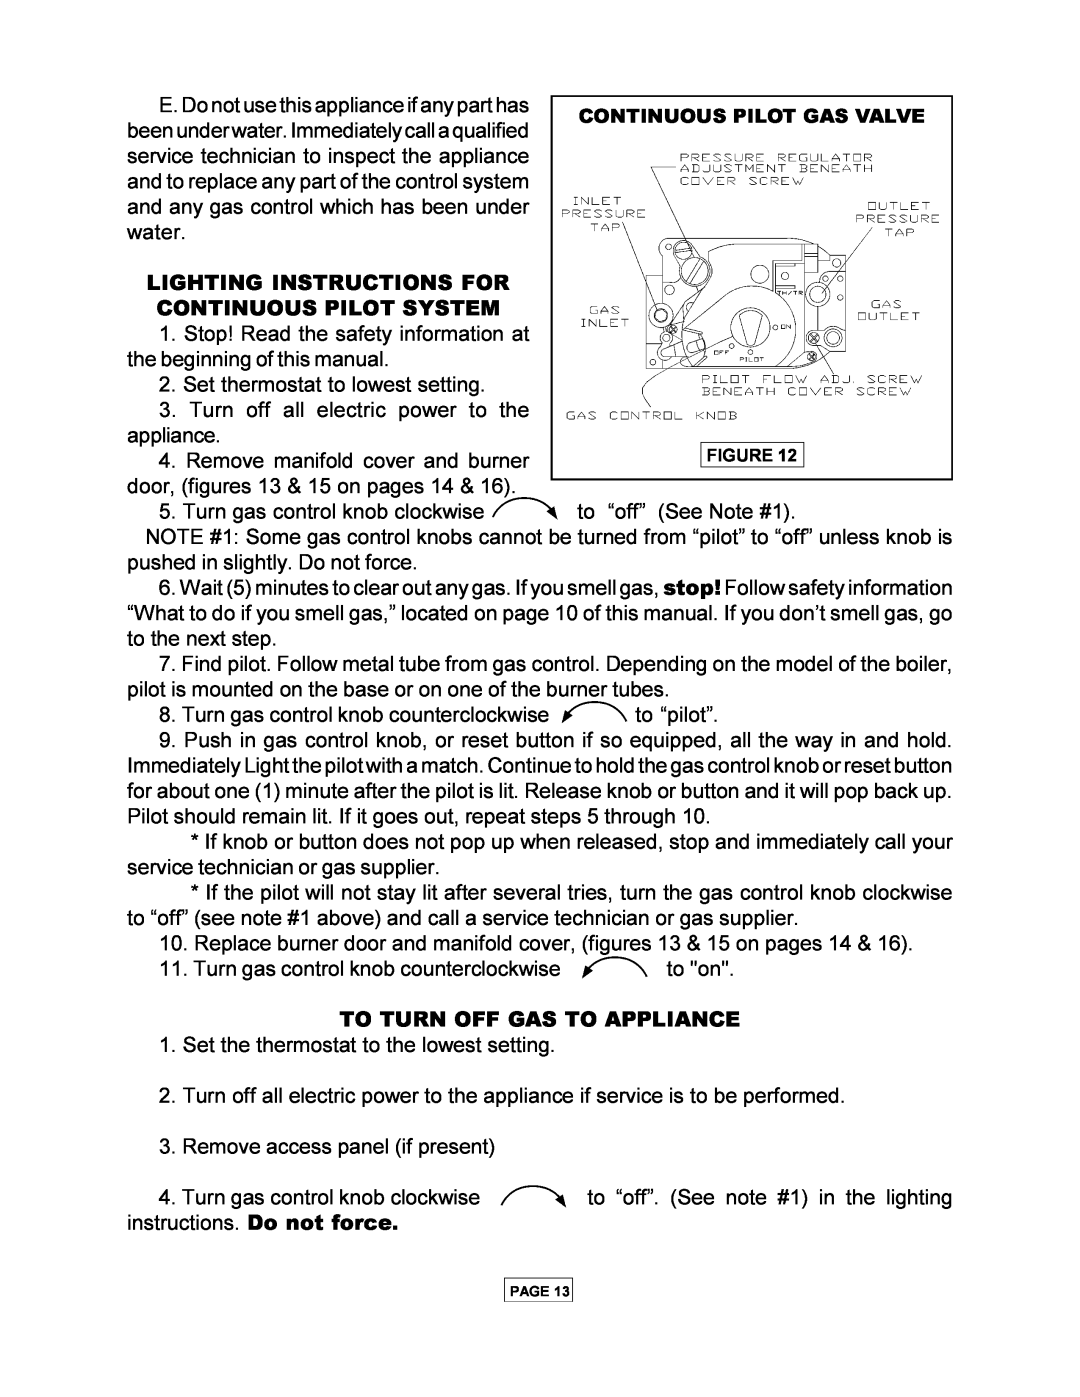 Utica PEG-C installation manual Lighting Instructions For Continuous Pilot System, To Turn Off Gas To Appliance 